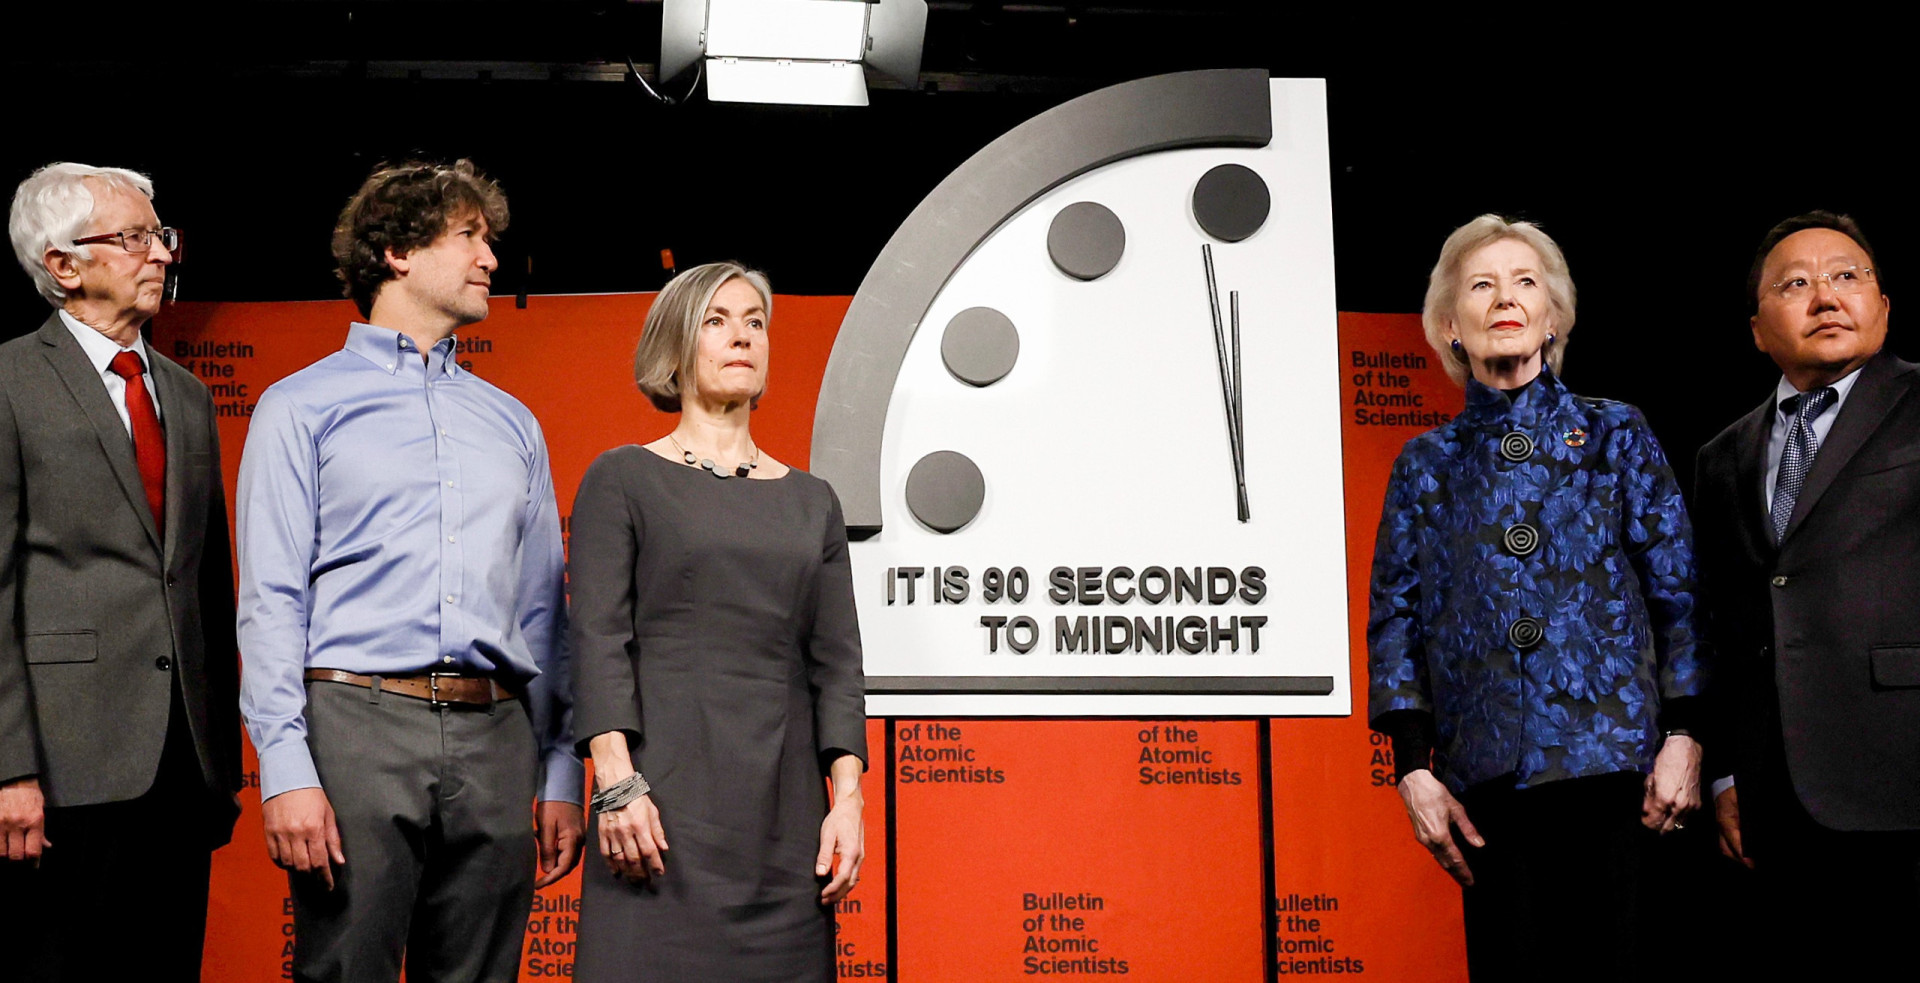 <p>In 2023, the clock was moved 10 seconds closer to midnight, leaving us just 90 seconds away from doomsday. This was in response to Russia's attack on Ukraine and the imminent threat of nuclear war. “We are sending a message that the situation is becoming more urgent,” said Rachel Bronson, President of the Bulletin of Atomic Scientists. "Crises are more likely to happen and have broader consequences and longer standing effects.” Other threats to humanity mentioned included "nuclear weapon proliferation in China, Iran increasing its uranium enrichment, missile tests in North Korea, future pandemics from animal diseases, pathogens from lab mistakes, “disruptive technologies,” and worsening climate change."</p> <p>Sources: (BBC) (Bulletin of the Atomic Scientists) (CTBTO)</p> <p>See also: <a href="https://www.starsinsider.com/travel/354889/after-chernobyl-meet-the-ukrainian-ghost-city">After Chernobyl: meet the Ukrainian ghost city</a></p><p><a href="https://www.msn.com/en-au/community/channel/vid-7xx8mnucu55yw63we9va2gwr7uihbxwc68fxqp25x6tg4ftibpra?cvid=94631541bc0f4f89bfd59158d696ad7e">Follow us and access great exclusive content every day</a></p>